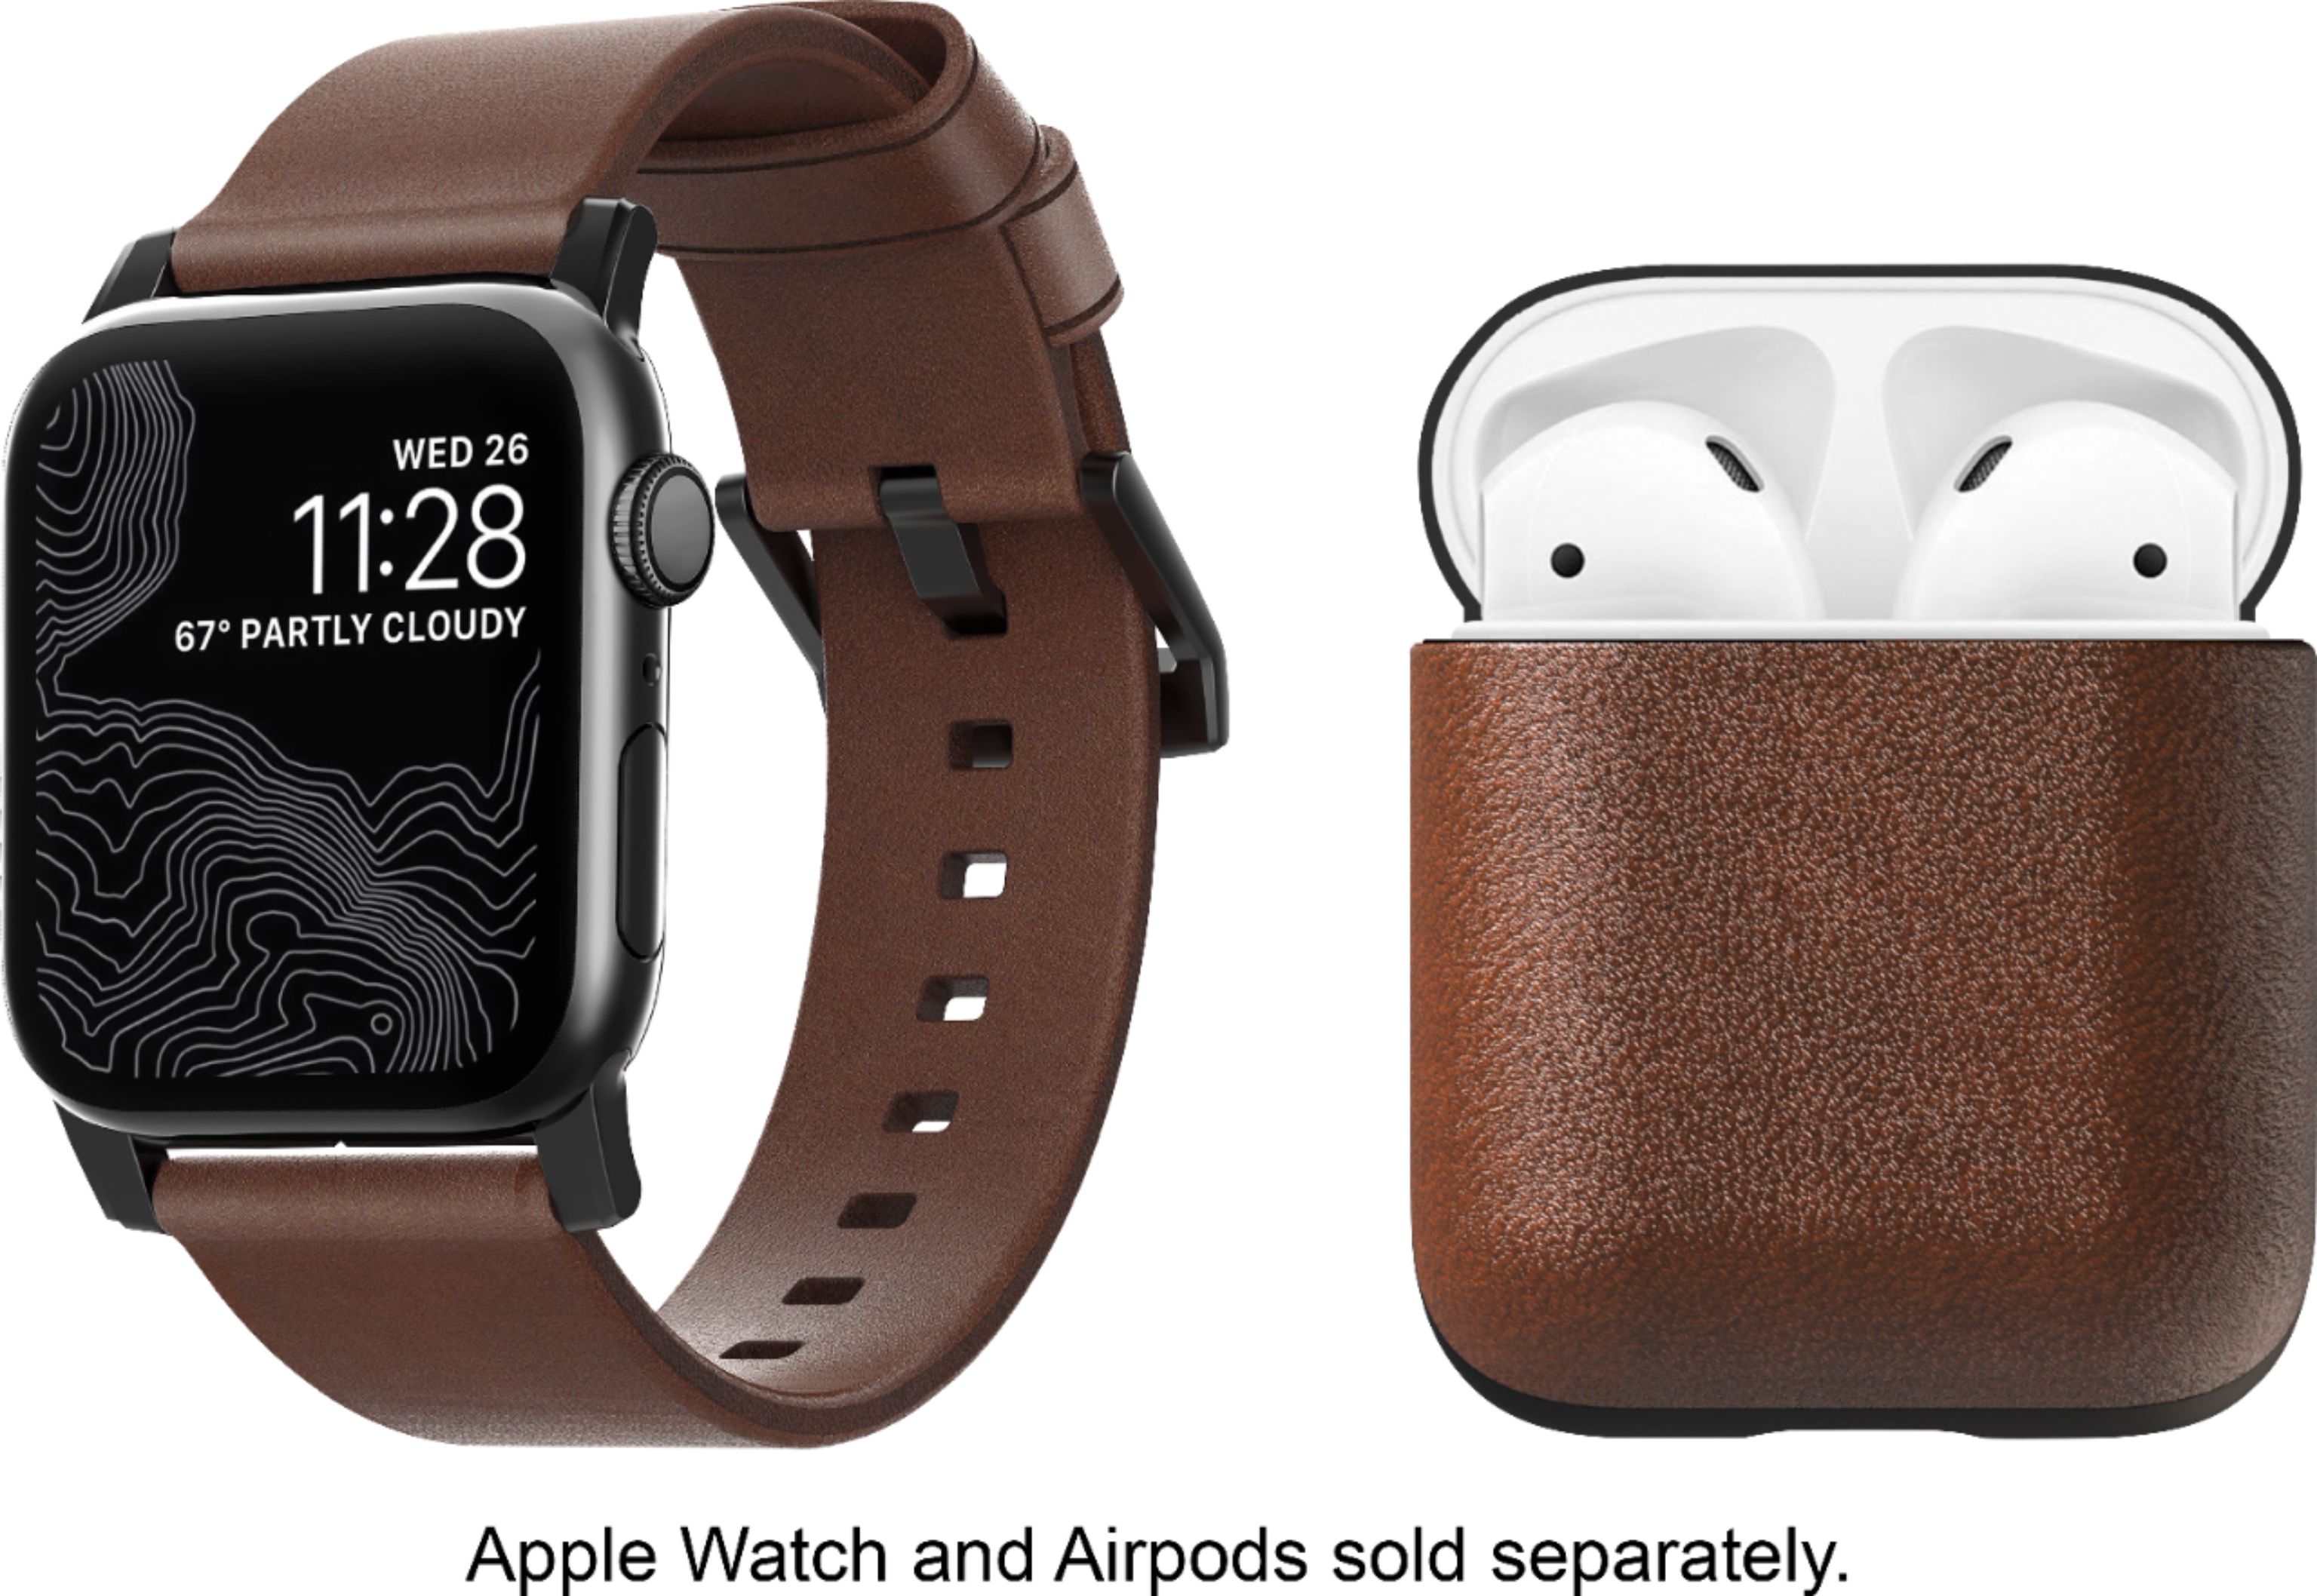 leather band apple watch 44mm